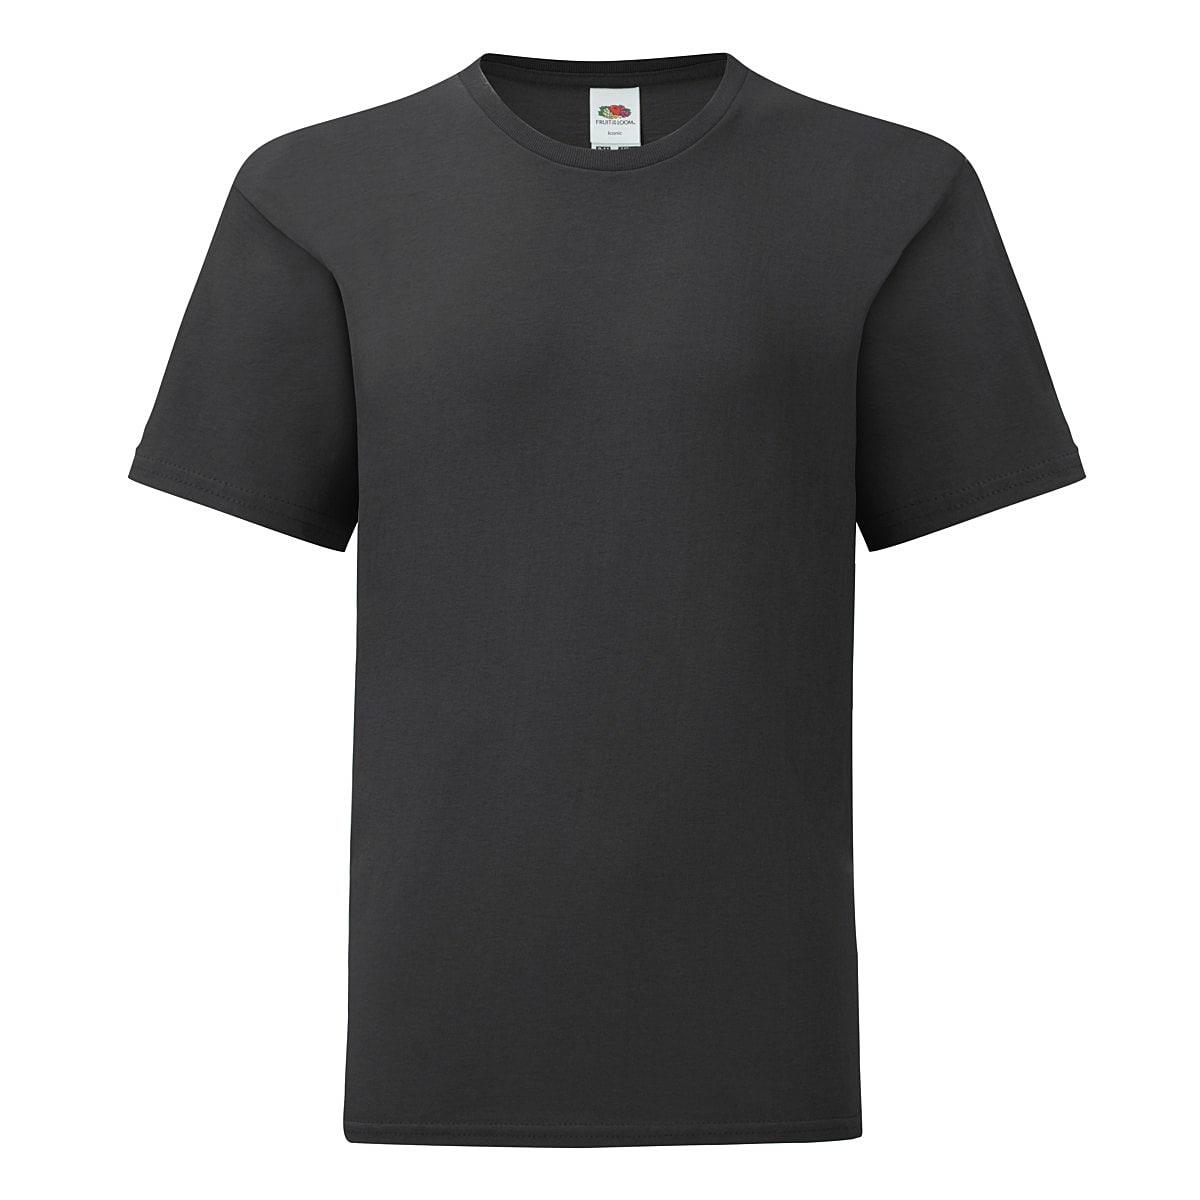 Fruit Of The Loom Kids Iconic T-Shirt in Black (Product Code: 61023)